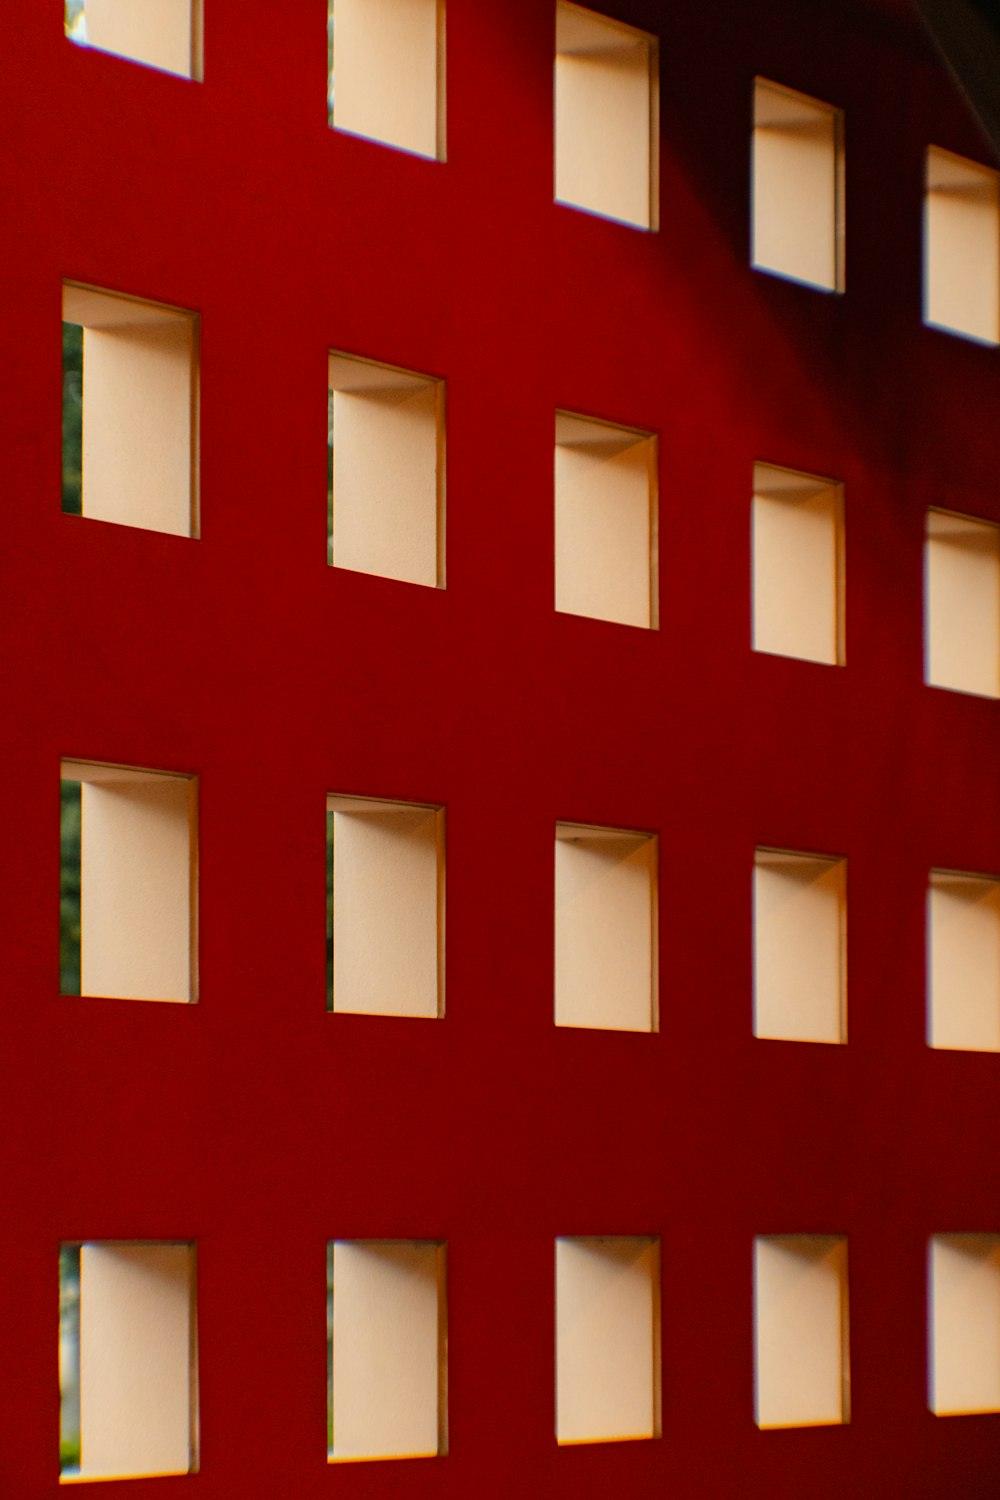 a red building with many windows and a clock